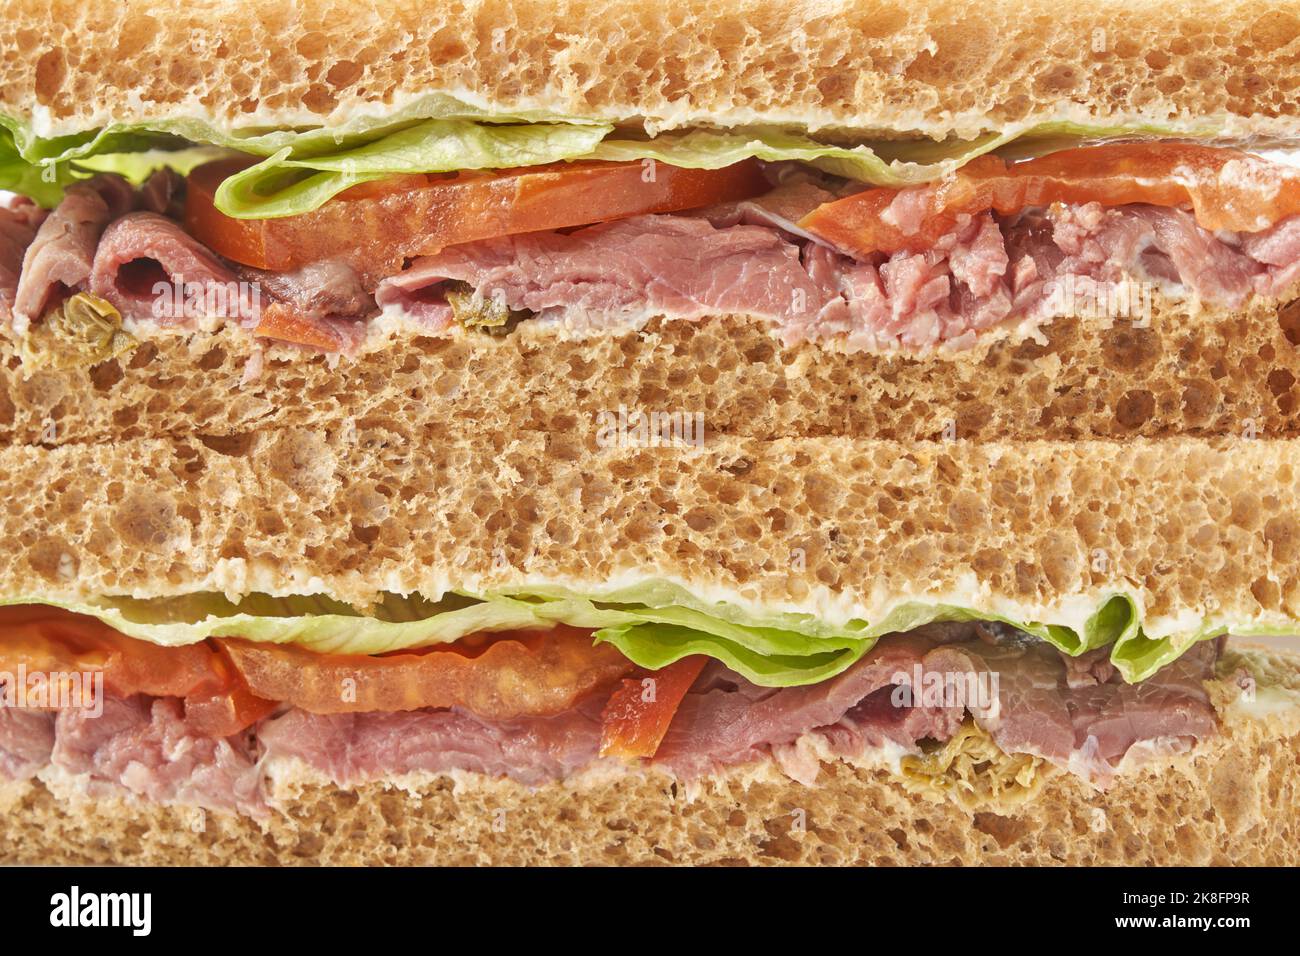 Delicious stuffed layer of ham and veggies in brown bread sandwich Stock Photo